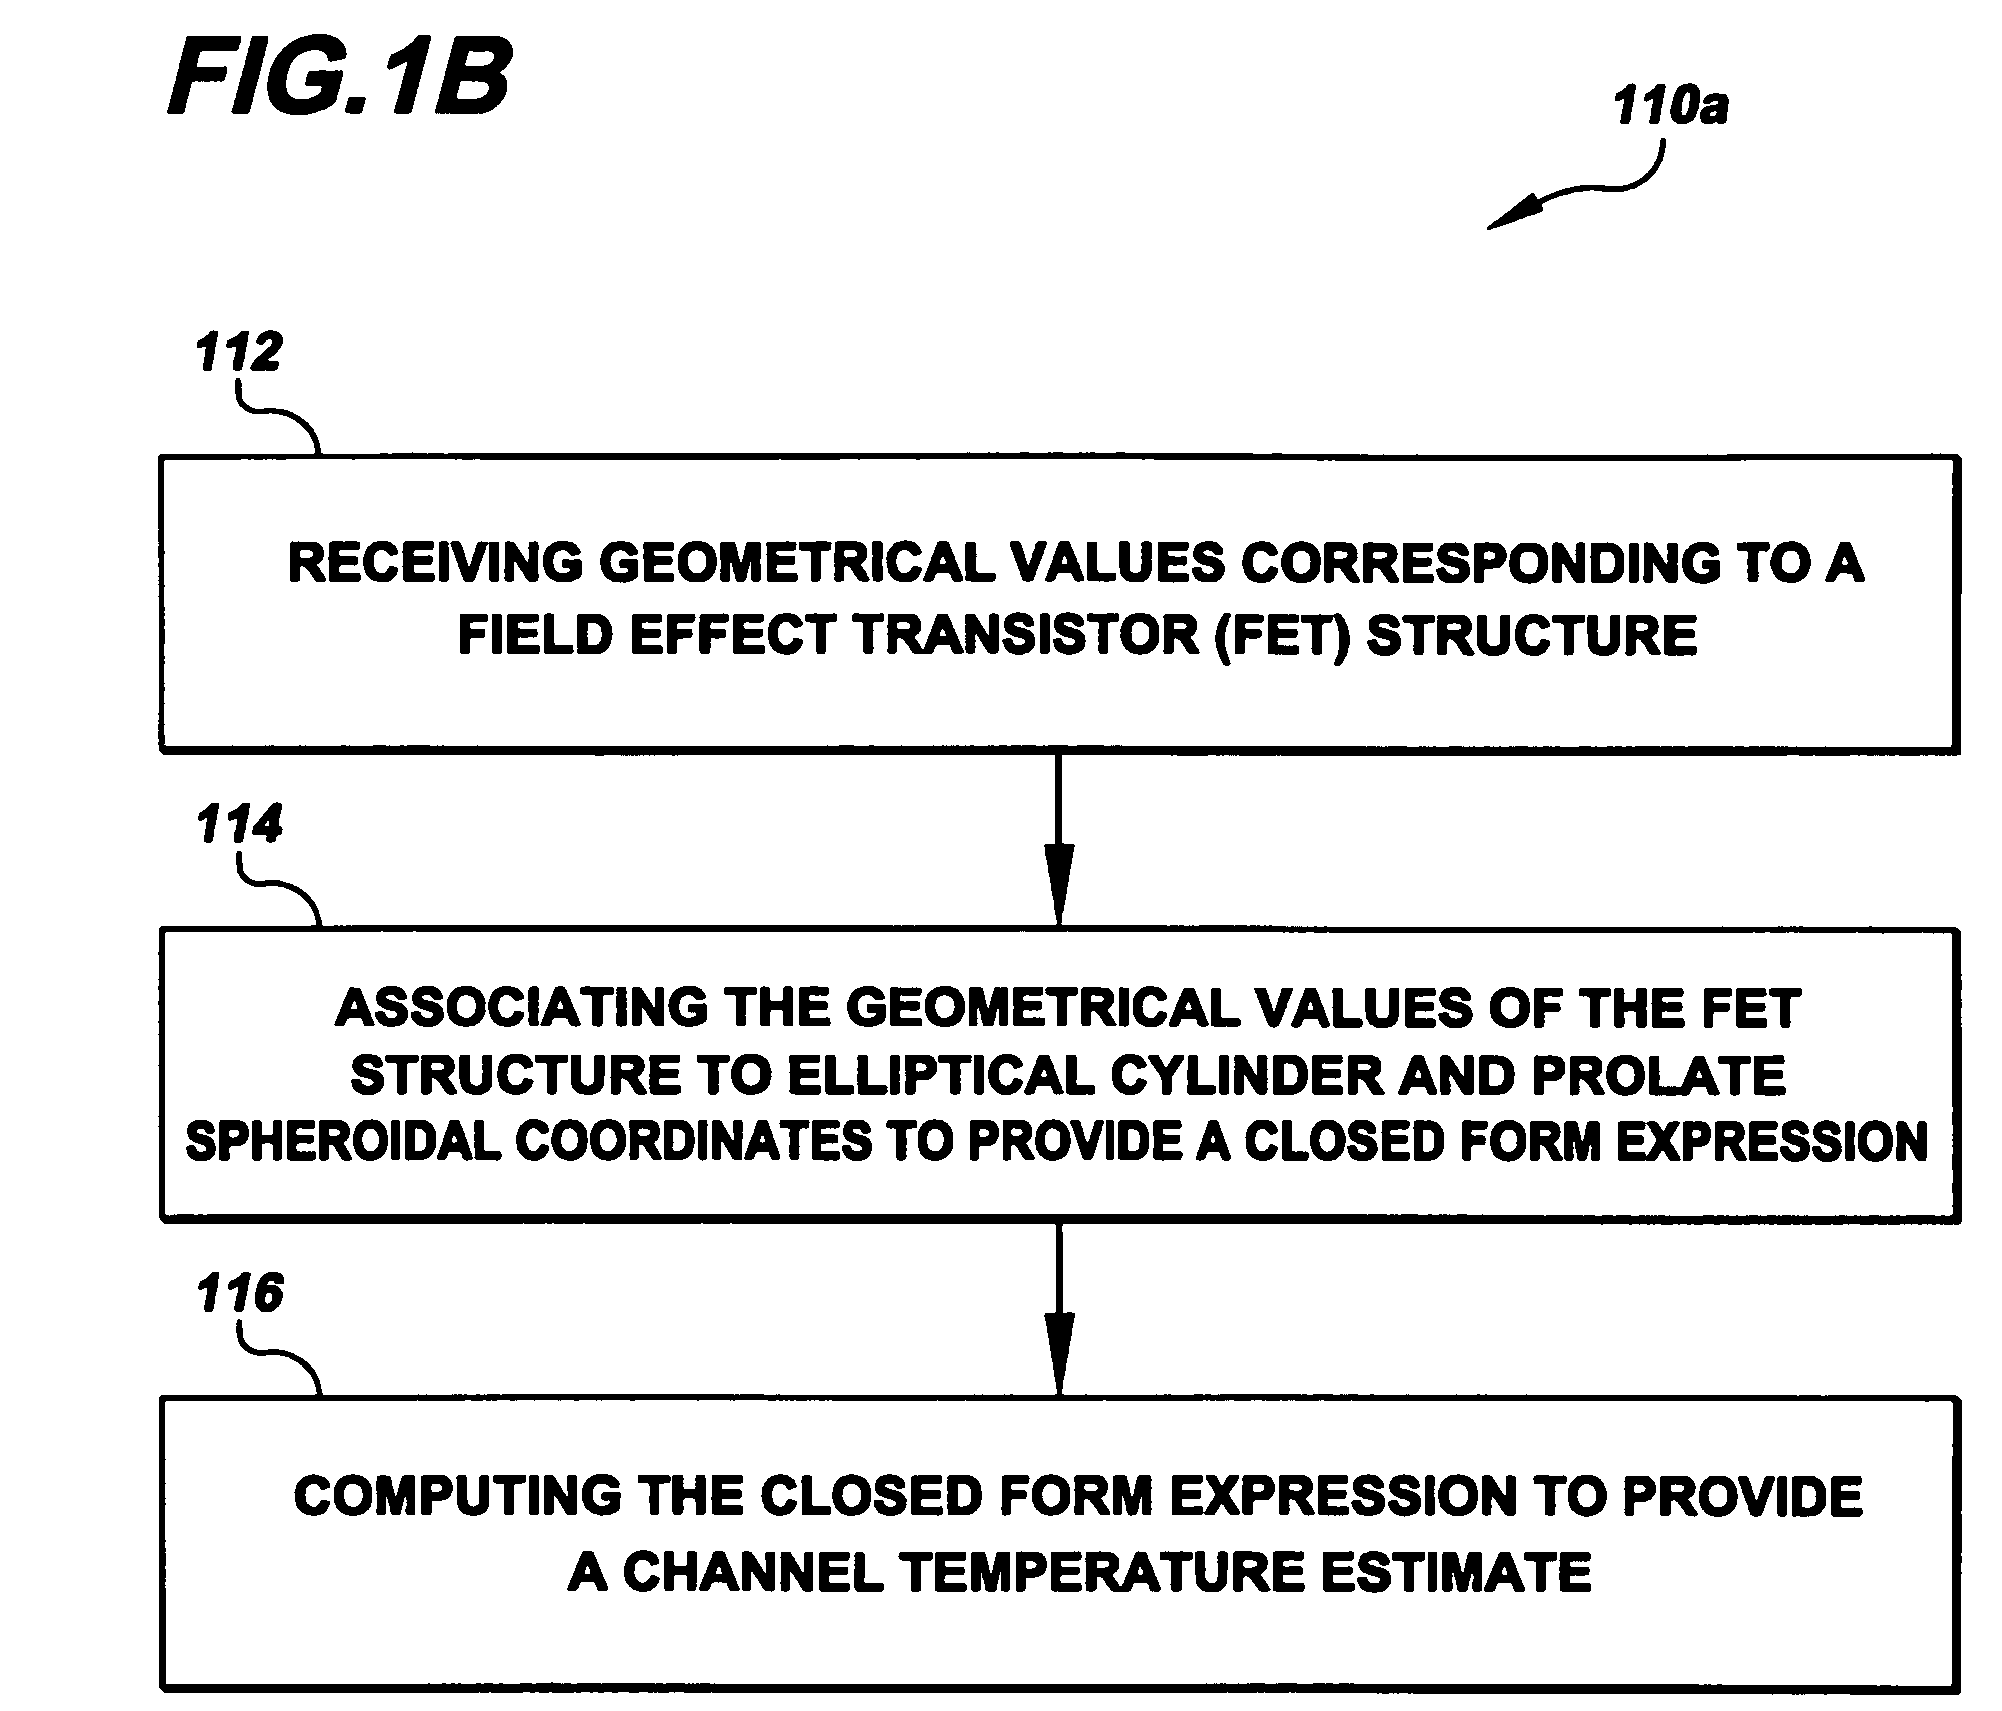 Systems and methods for estimating thermal resistance of field effect transistor structures